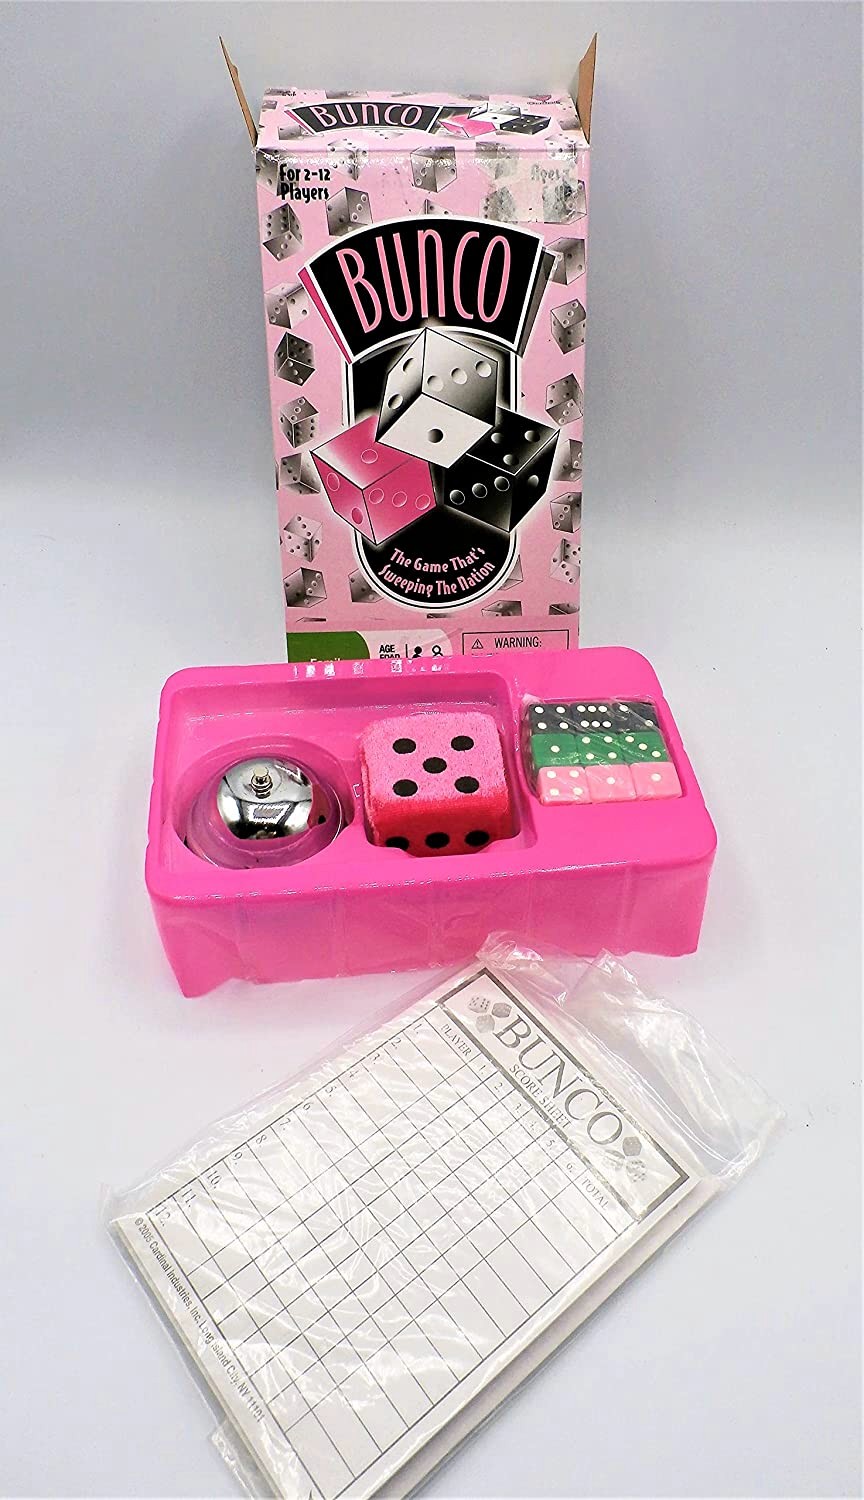 Scorecards Bell Includes Dice & Squishy Traveling Jewel Pencils Bunco: A Very Social Game 12-Player Party Dice Game 